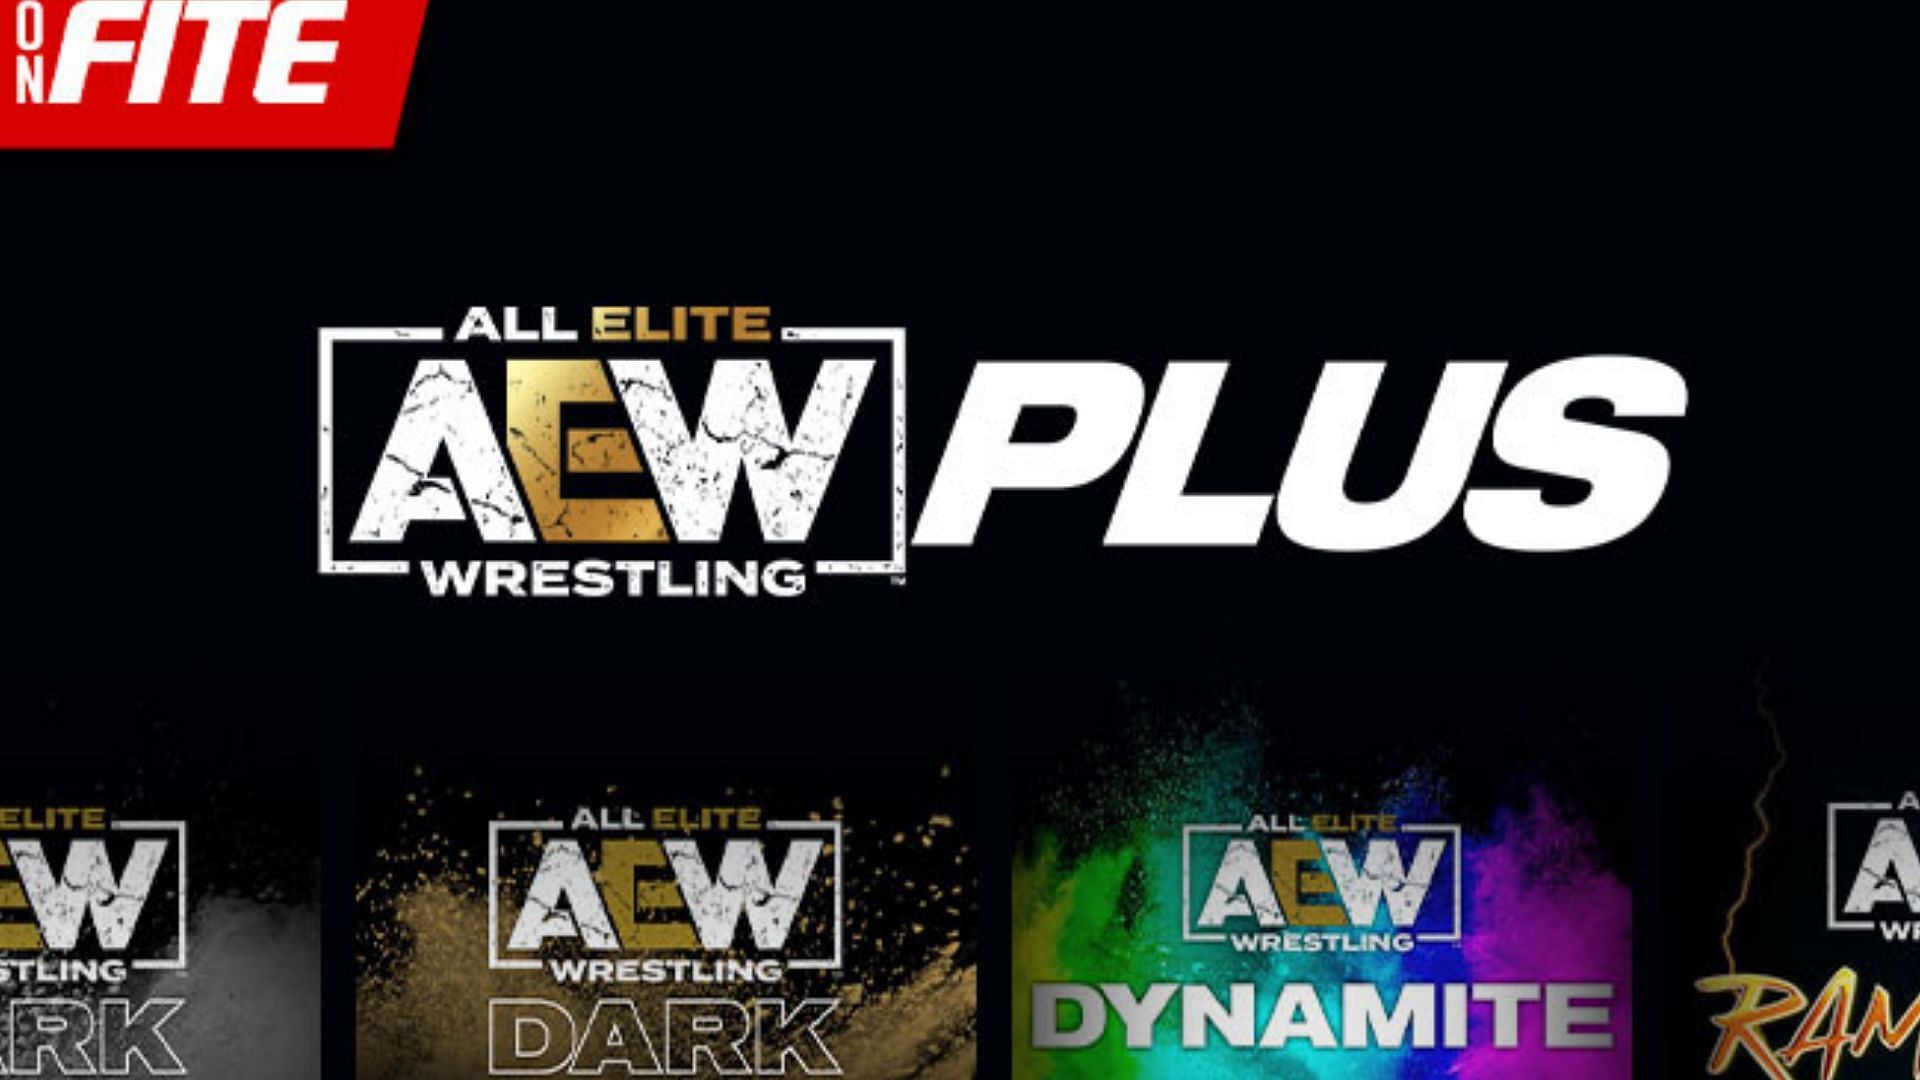 Fans on AEW Plus can access all of the AEW library plus extra content